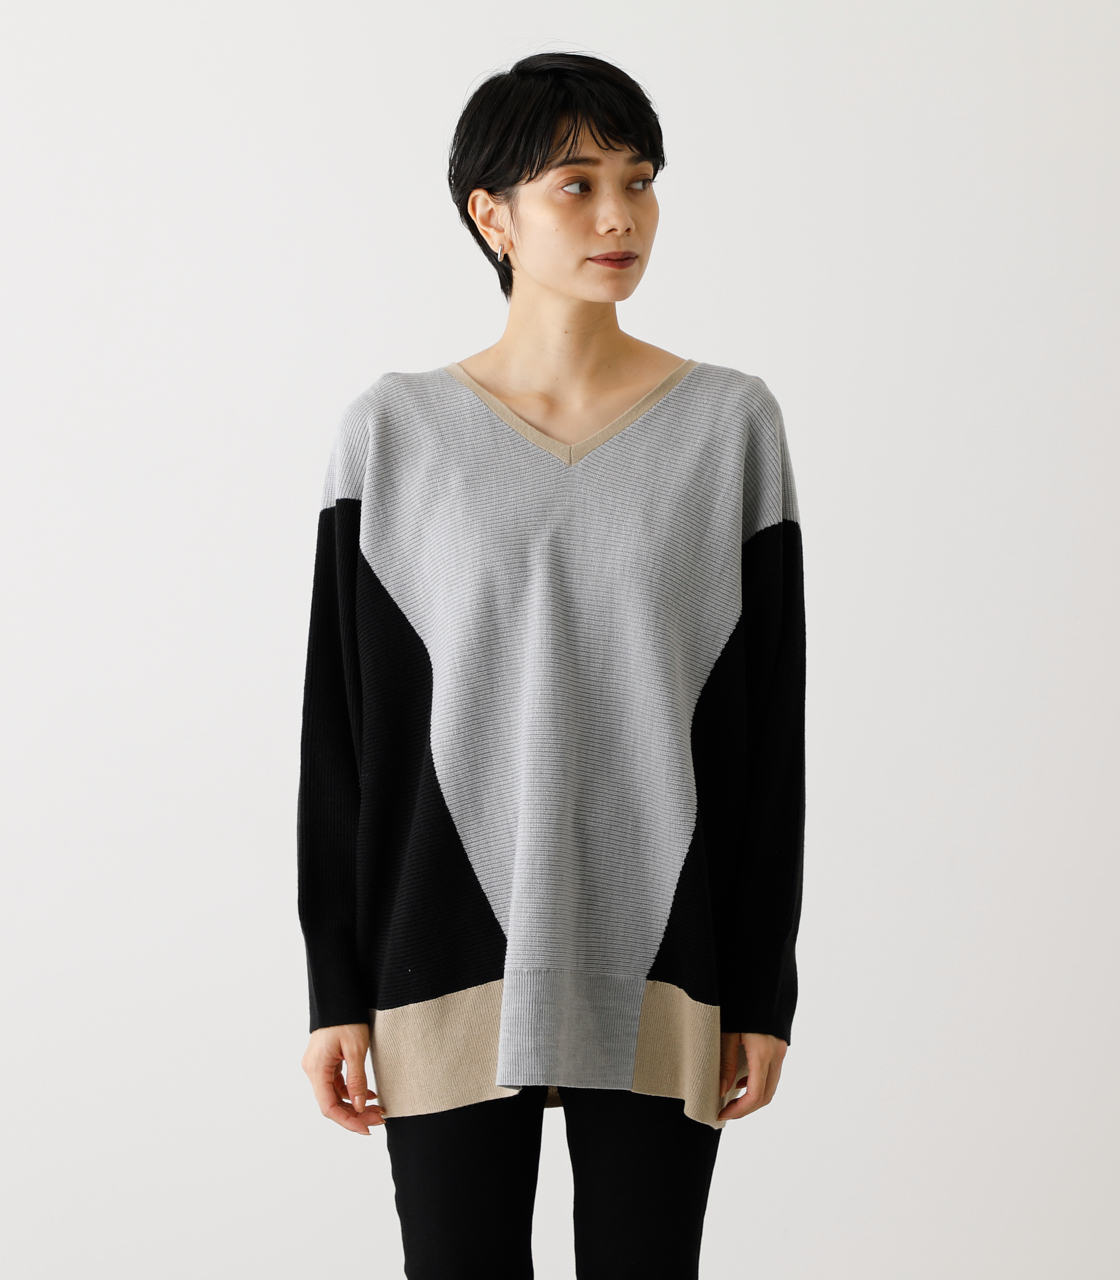 NUDIE DOLMAN KNIT TOPS/ヌーディードルマンニットトップス 詳細画像 柄GRY 5